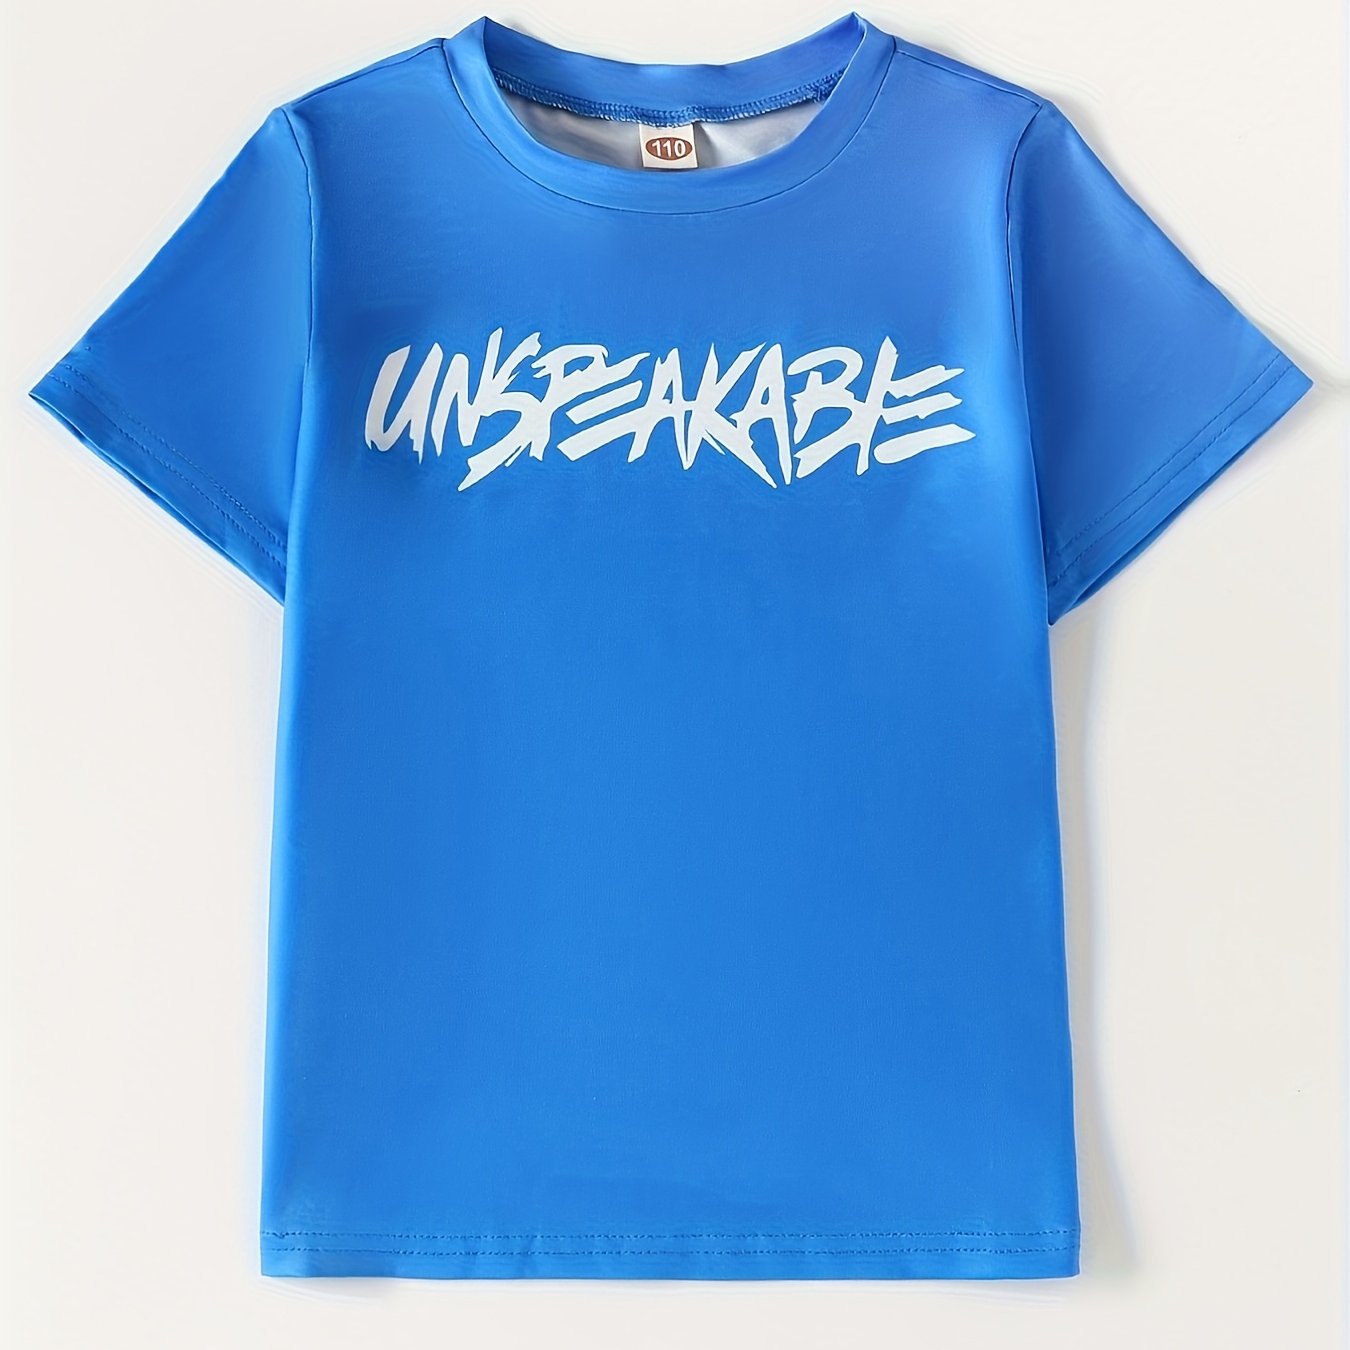 boys t shirts unspeakable tops fashion youth funny tee shirts t shirt for kids